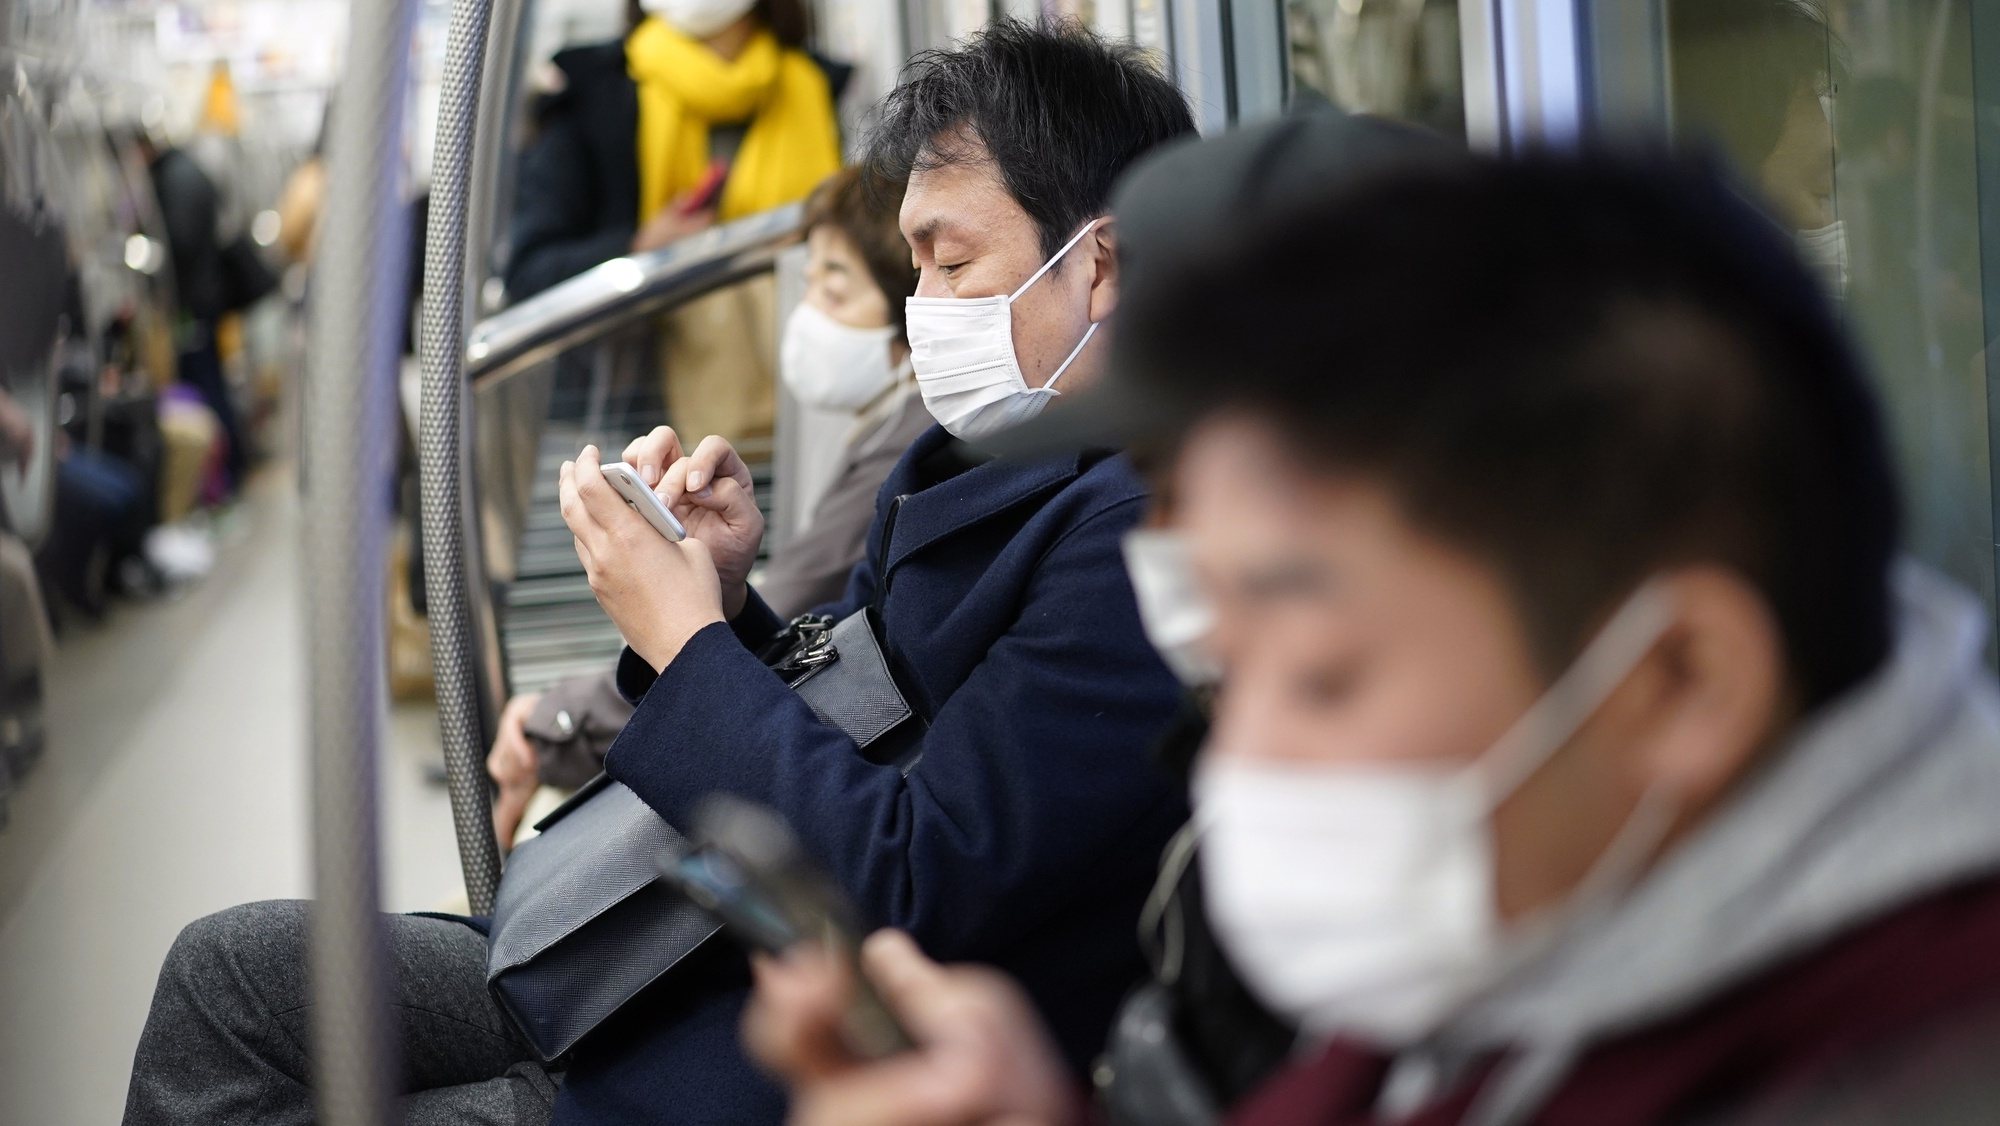 epa08921414 Commuters wearing face masks sit in a subway coach in Tokyo, Japan, 06 January 2021. The Tokyo Metropolitan Government announced that it has confirmed over 1,500 new coronavirus infections in Tokyo, a new record figure. Following the surge in cases number, the government is considering declaring a state of emergency in Tokyo and three surrounding prefectures.  EPA/FRANCK ROBICHON